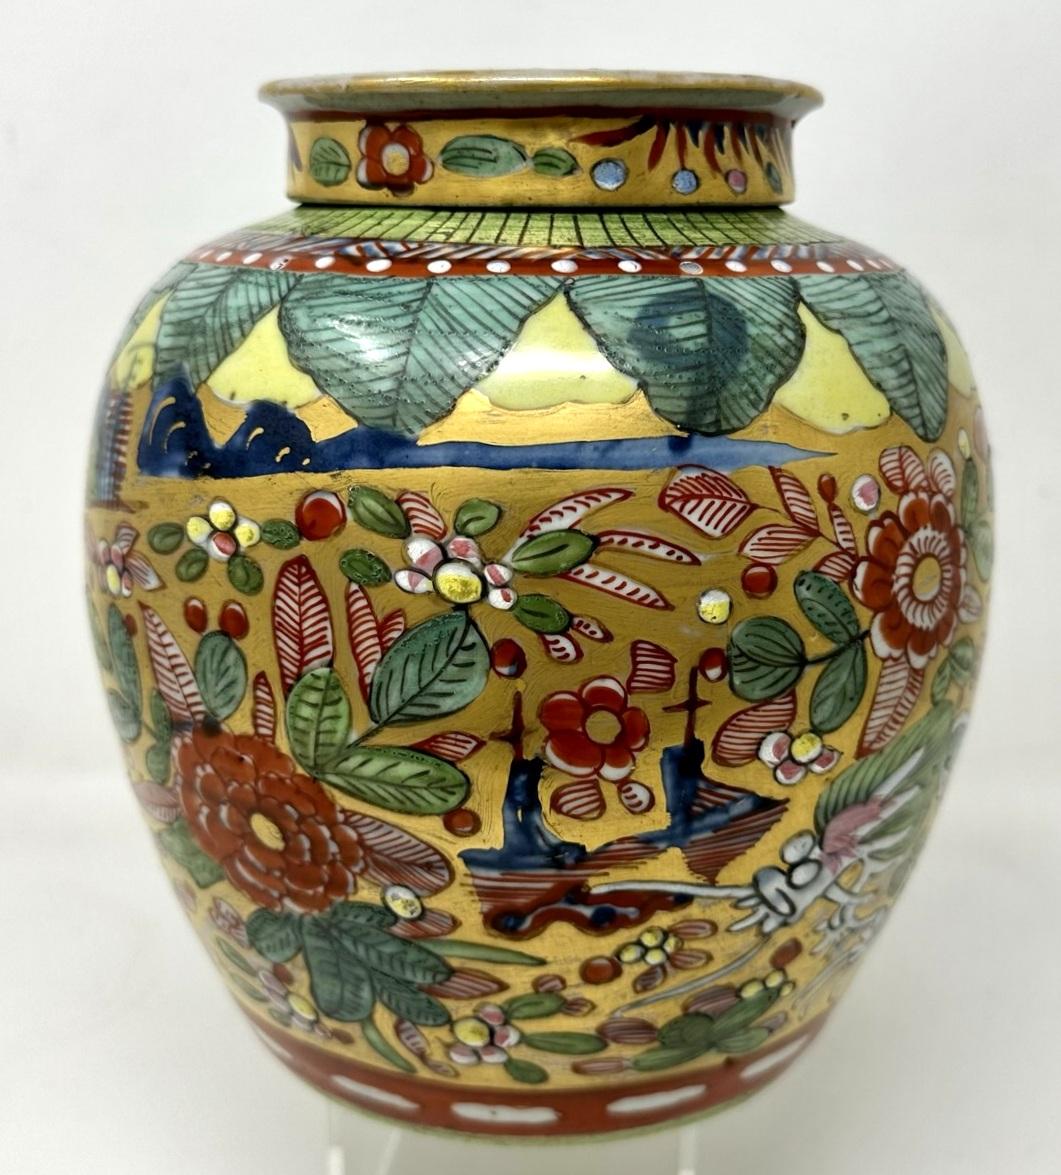 Rare and important Chinese Export Ginger Jar of medium proportions, late Nineteenth, early Twentieth Century, complete with original firm fitting cover. 

Exquisitely hand decorated in colours of various greens and iron reds on a very unusual gilt